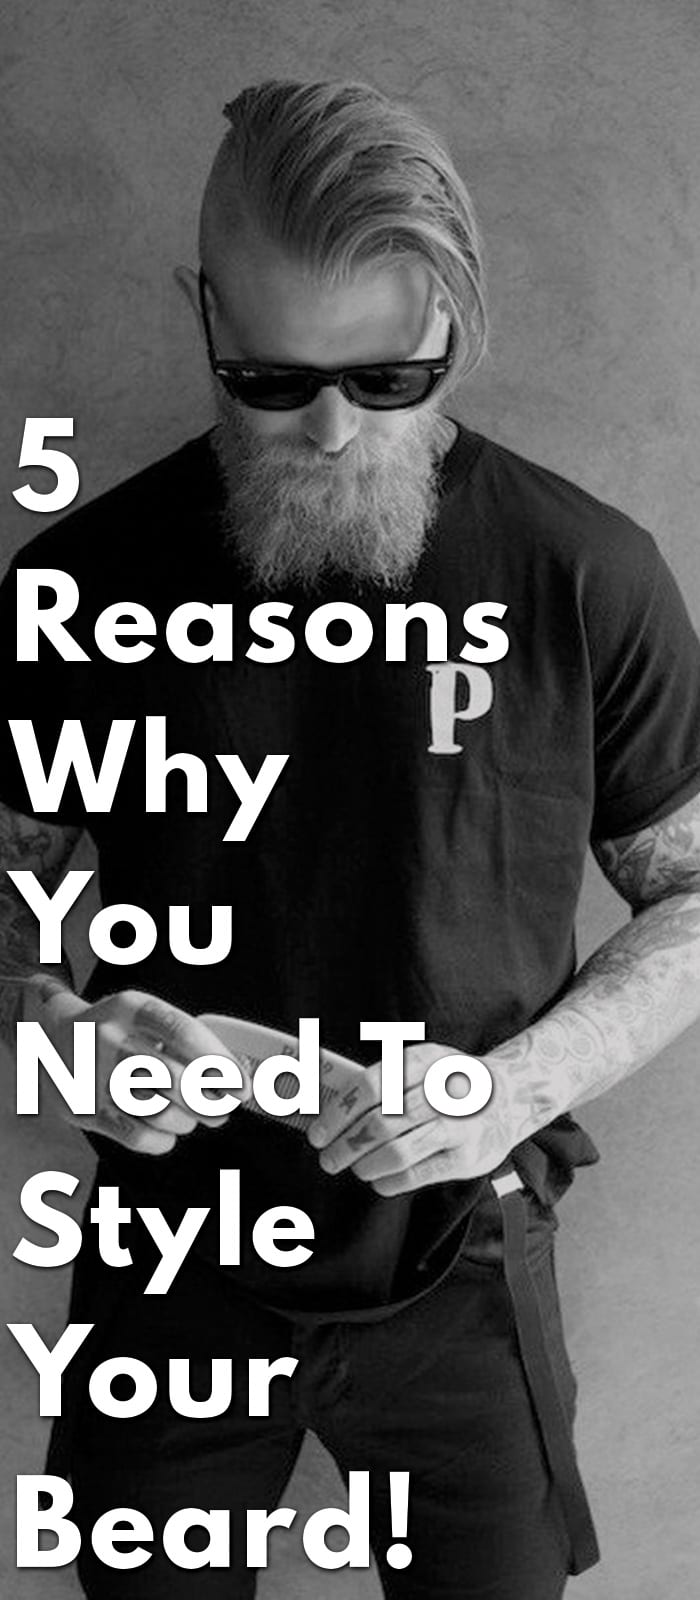 5-Reasons-why-you-need-to-style-your-beard!